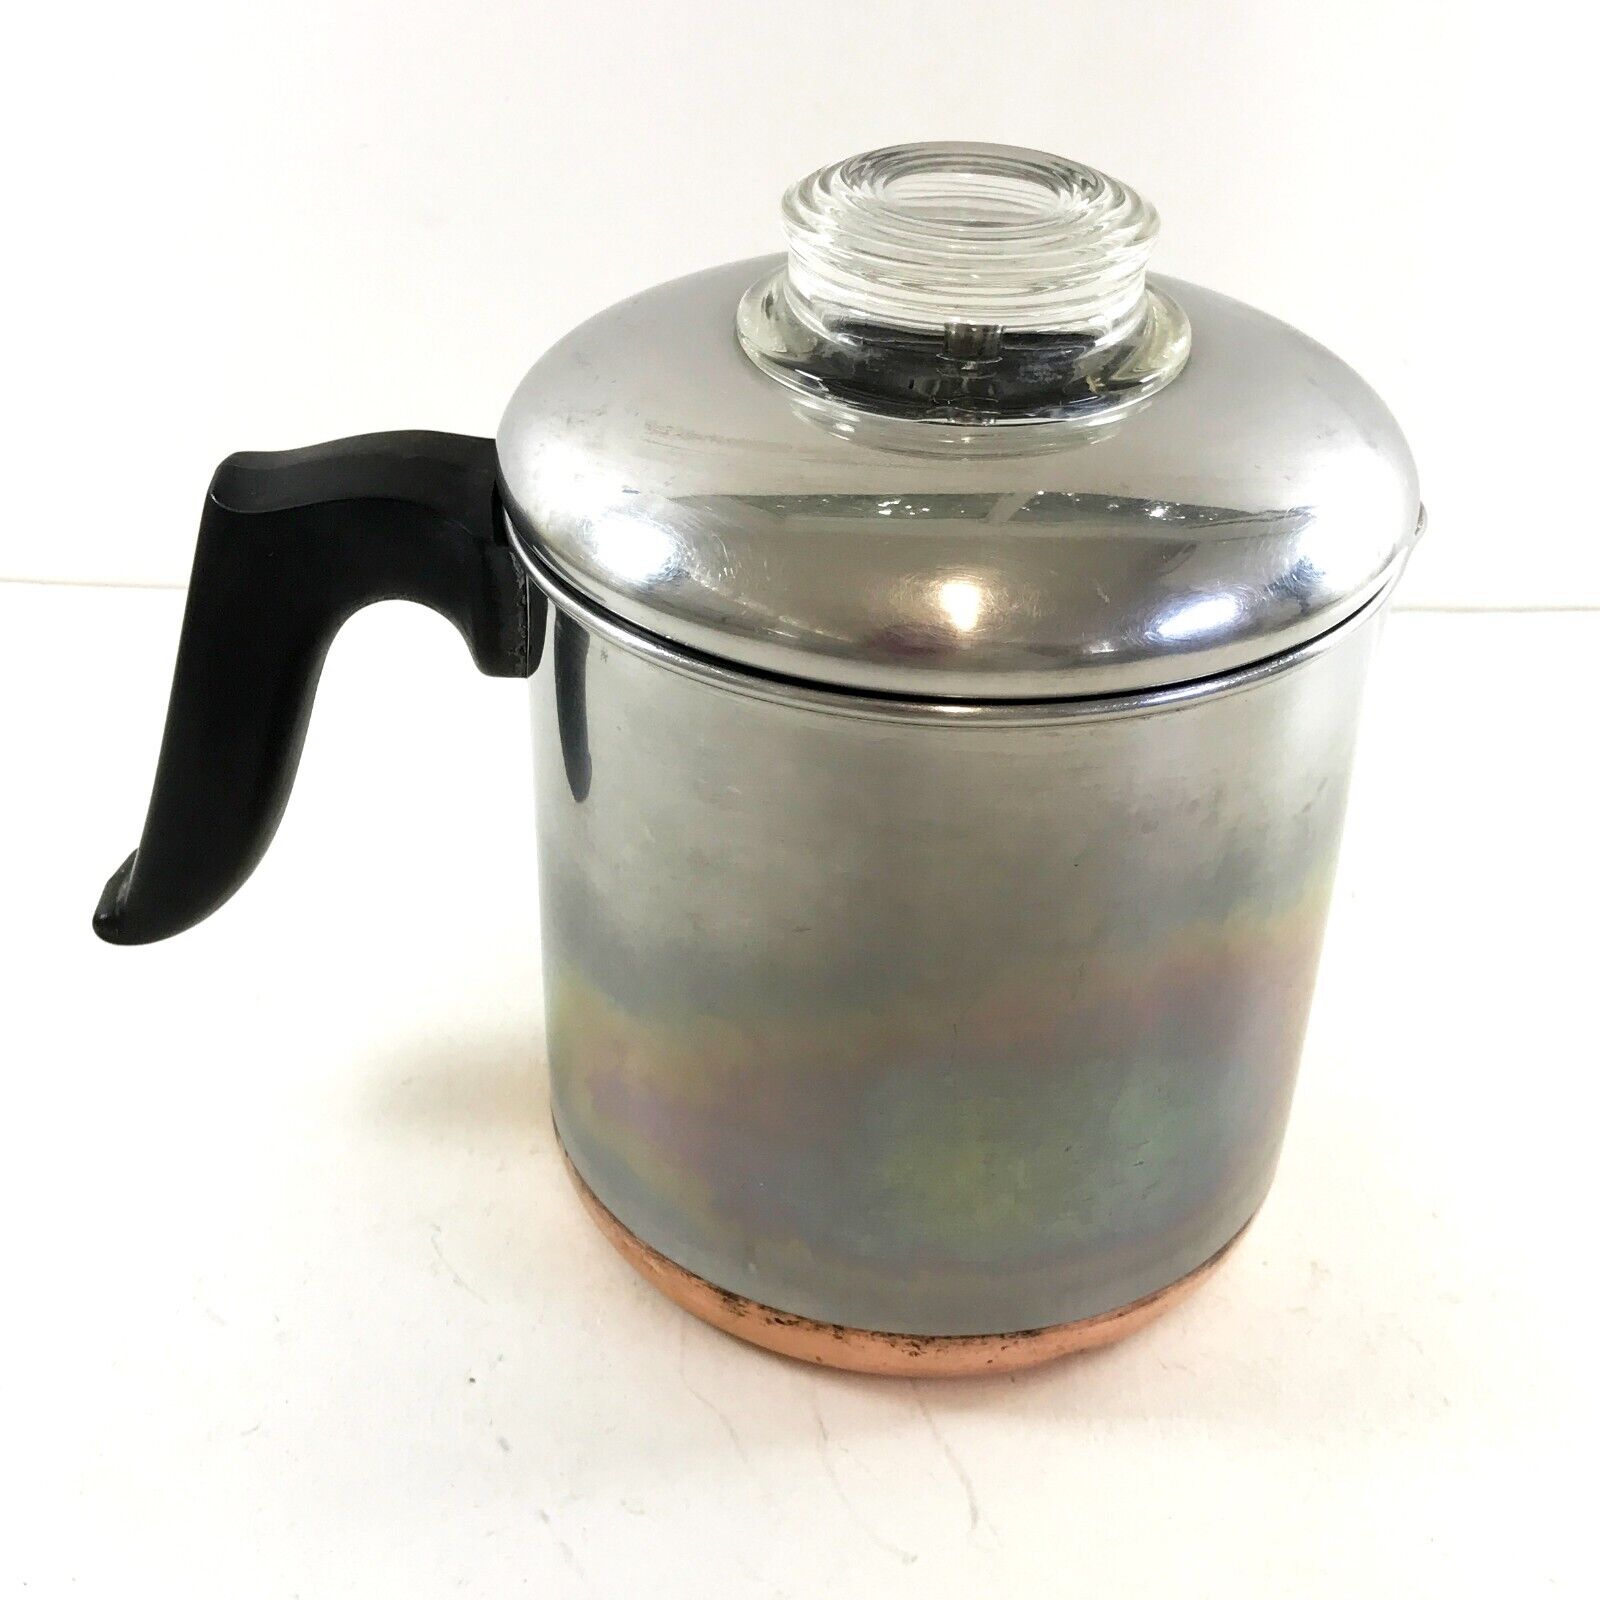 Vintage Revere Ware 1801 Coffee Pot Percolator 4 Cup Stainless Copper Bottom